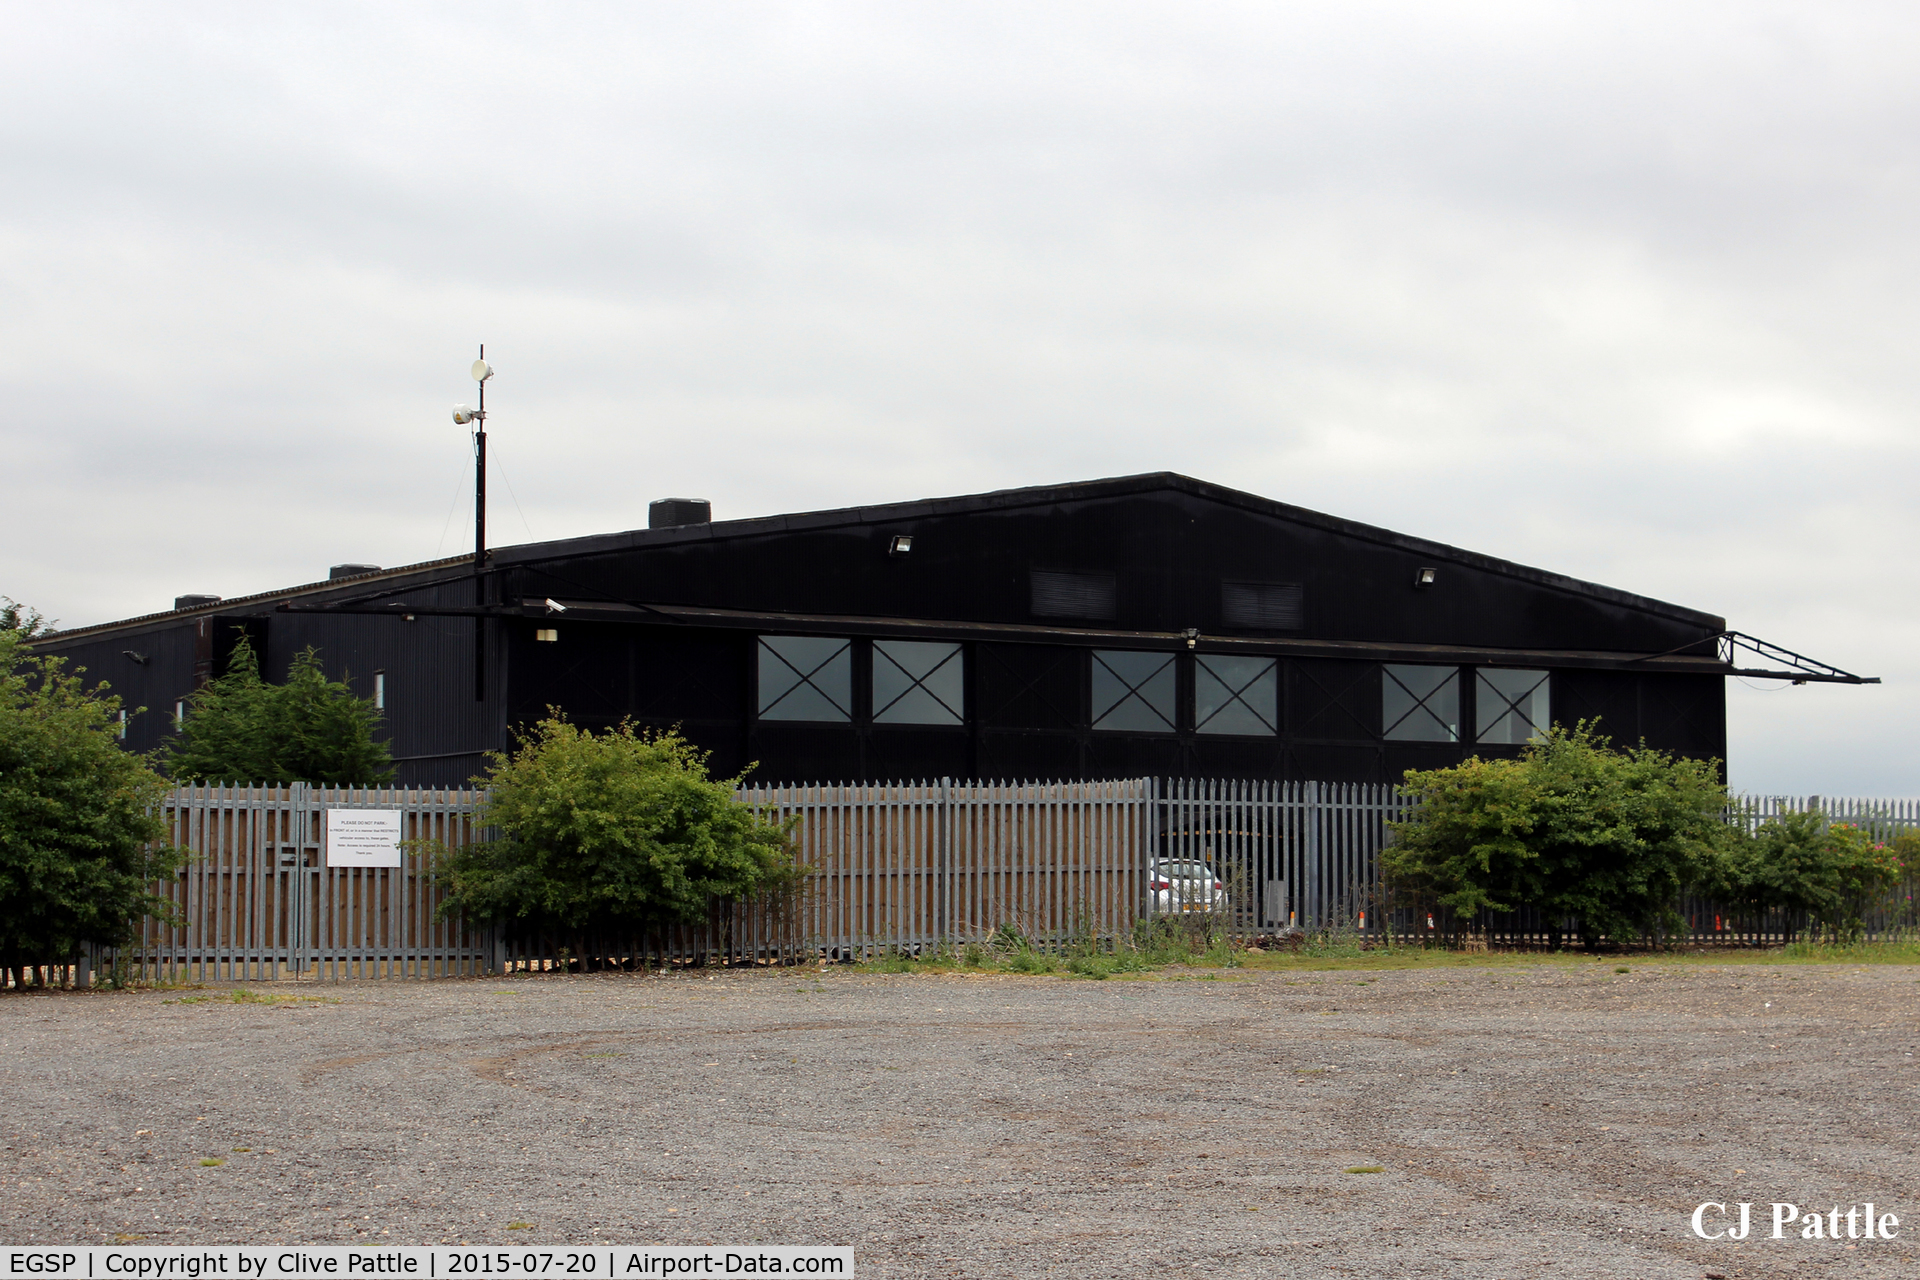 Peterborough/Sibson Airport, Peterborough, England United Kingdom (EGSP) - Another WWII hangar at Sibson EGSP, now not used for aviation related purposes.